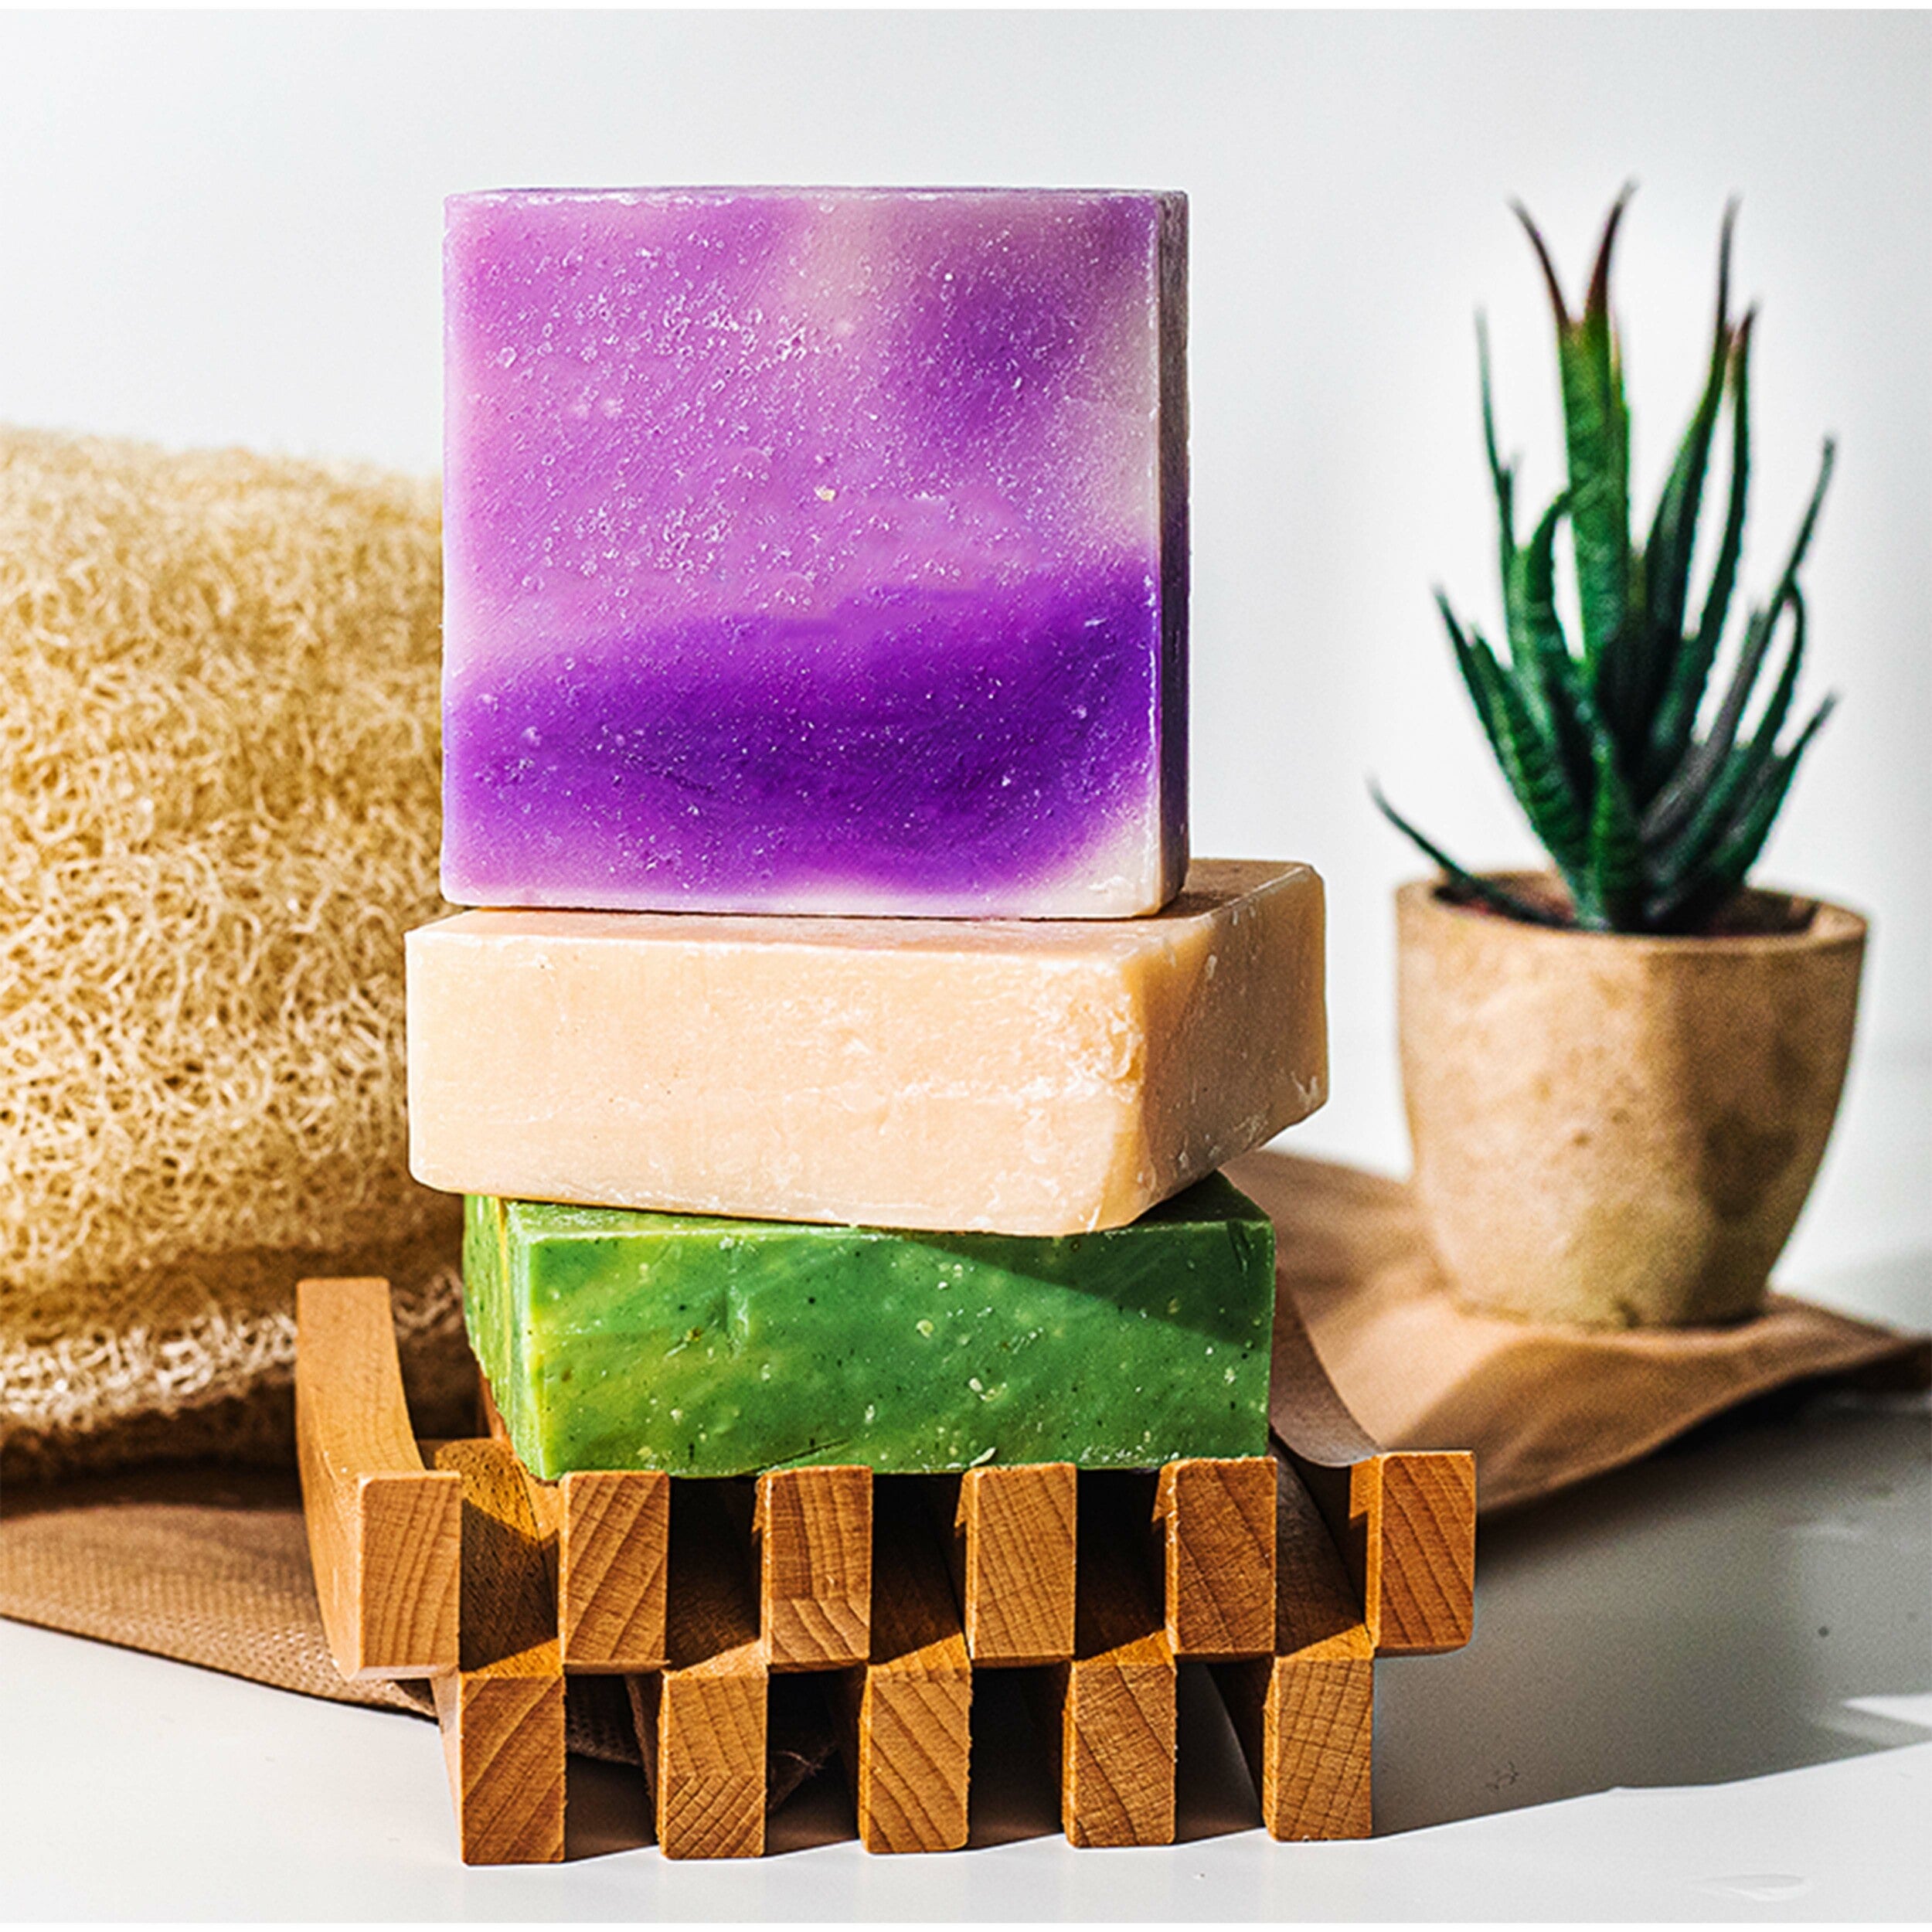 What Makes a Good Bar Soap? What About Glycerin?